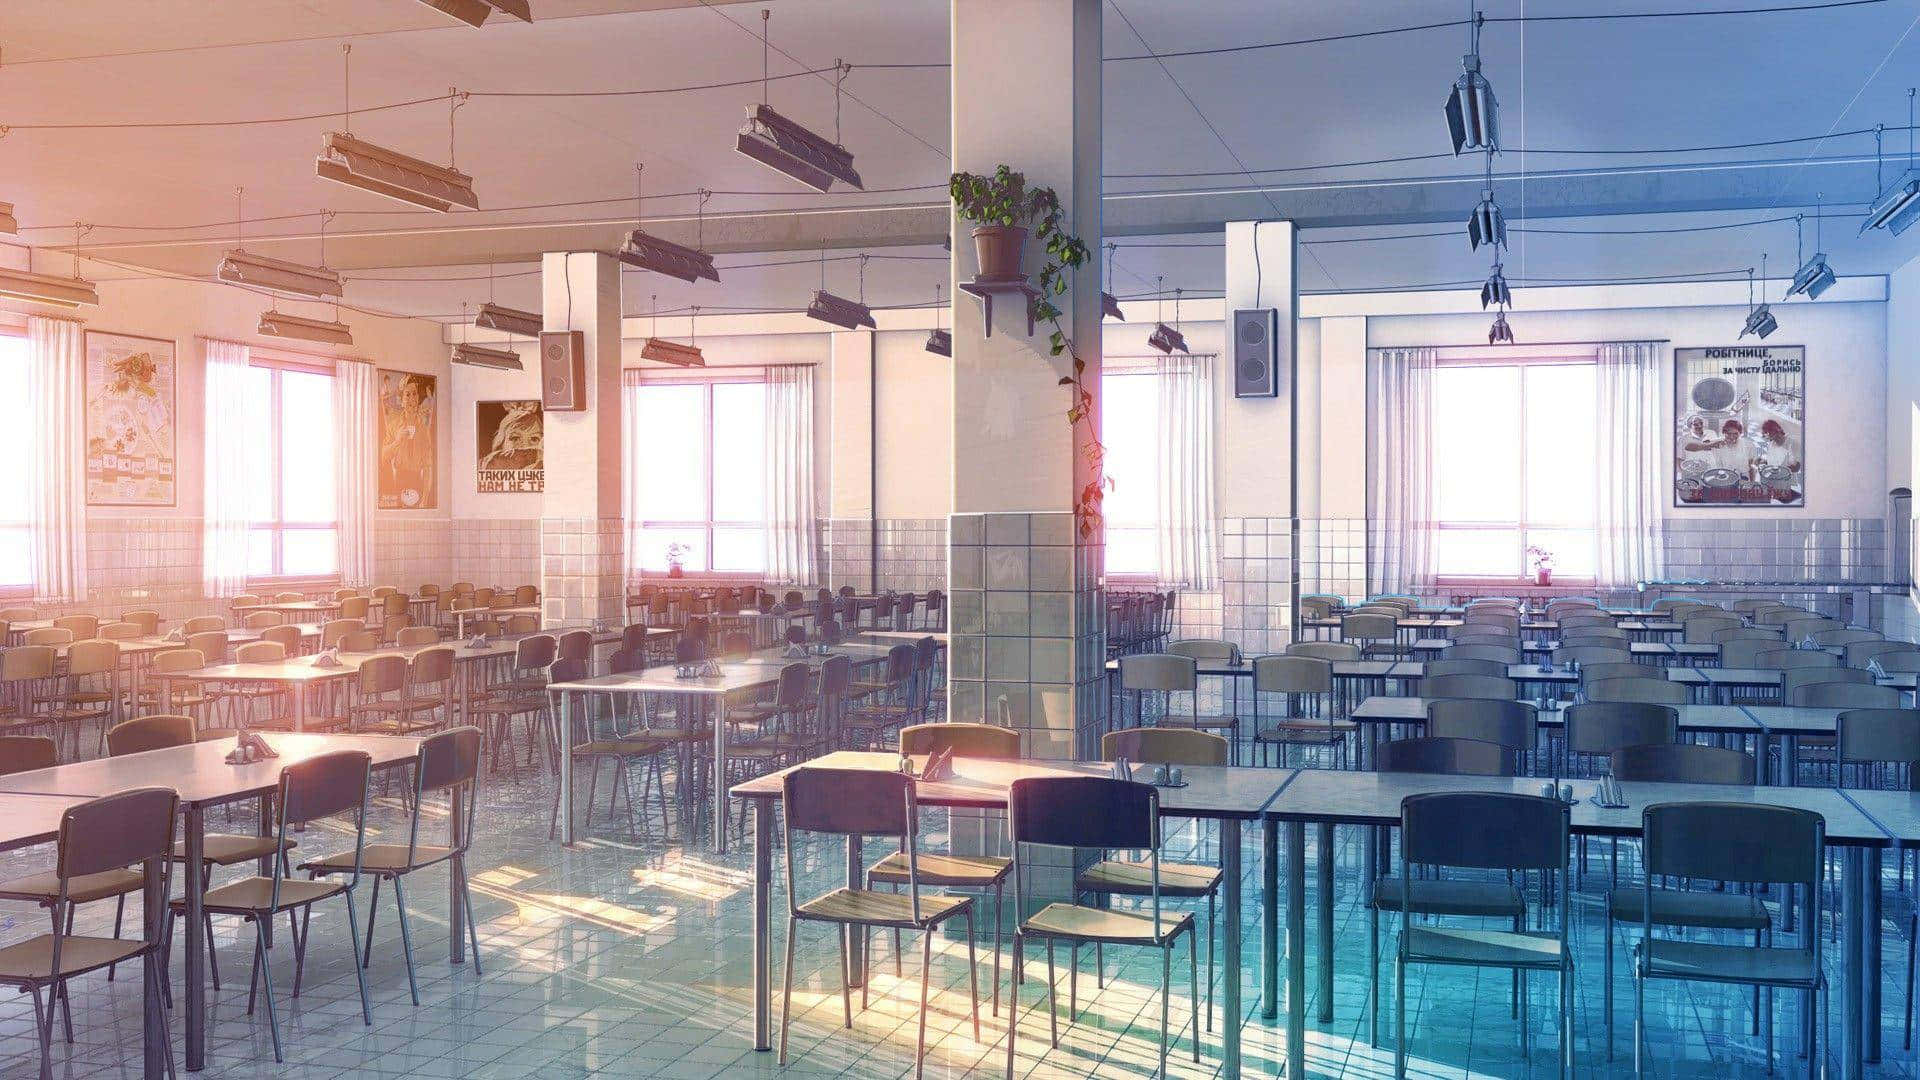 Join the Anime School and Explore its Aesthetic Environment